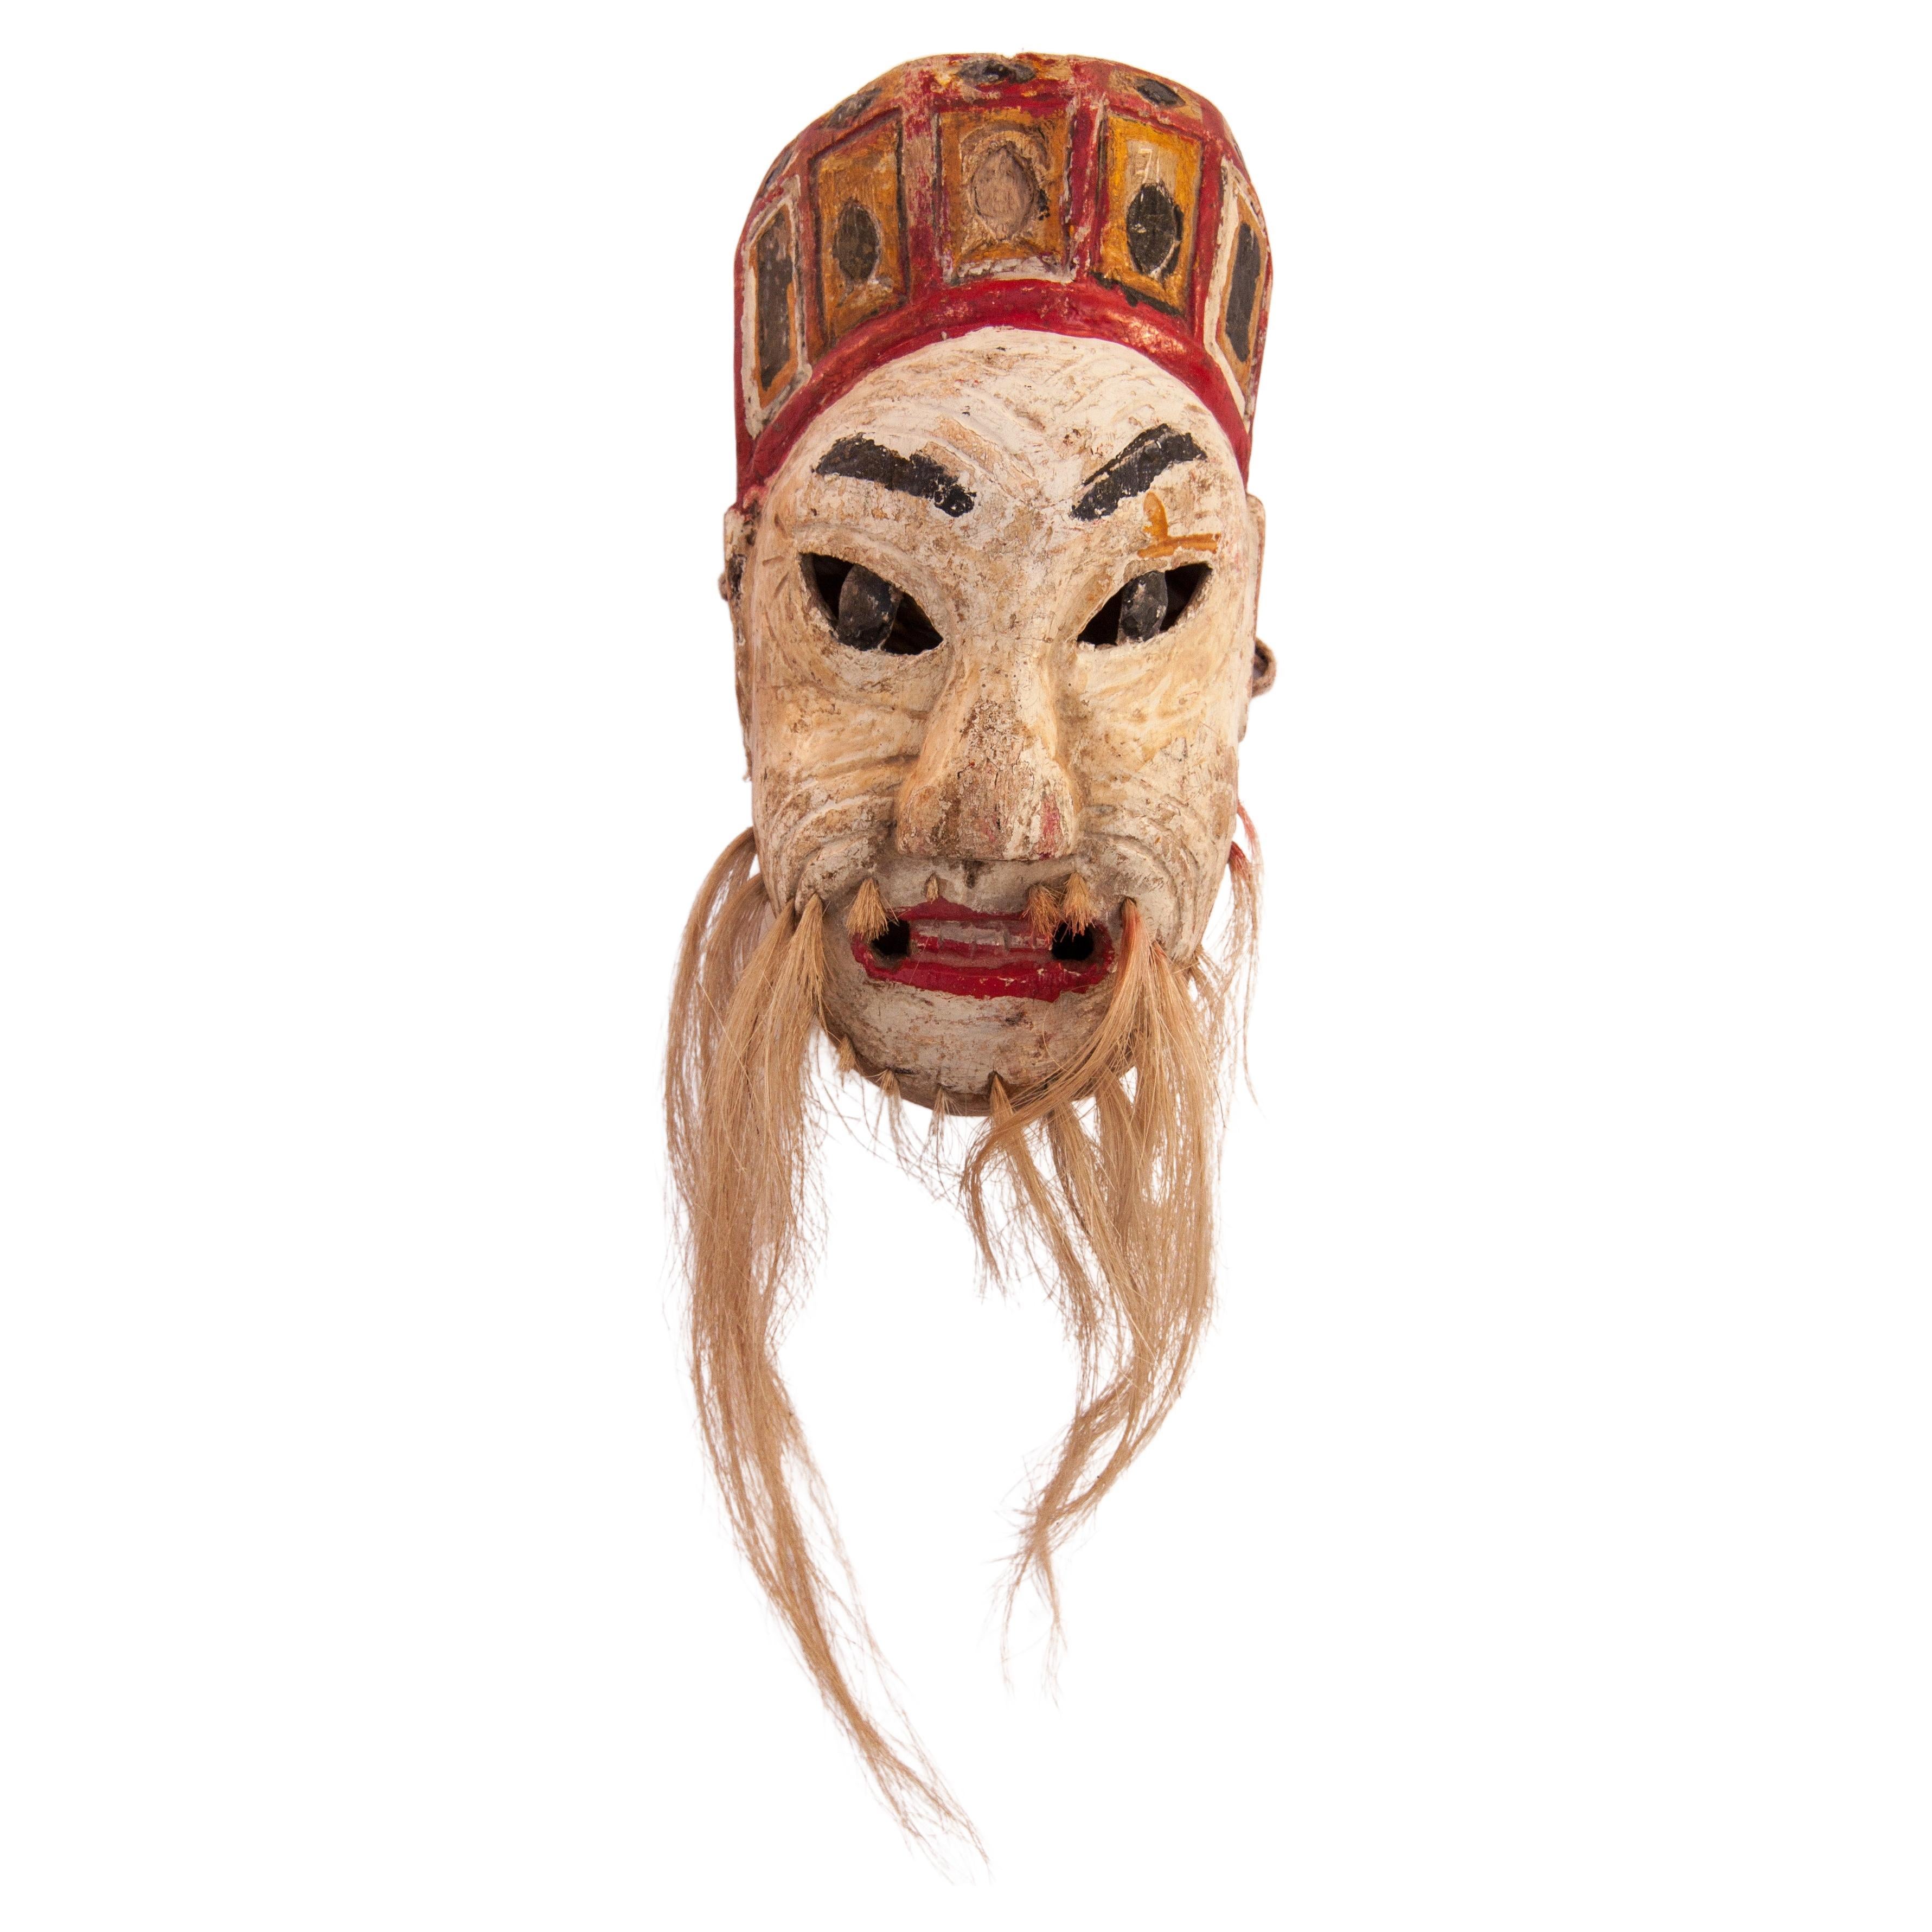 Vintage Nuo Theater Performance Mask Guizhou, China, Early to Mid-20th Century